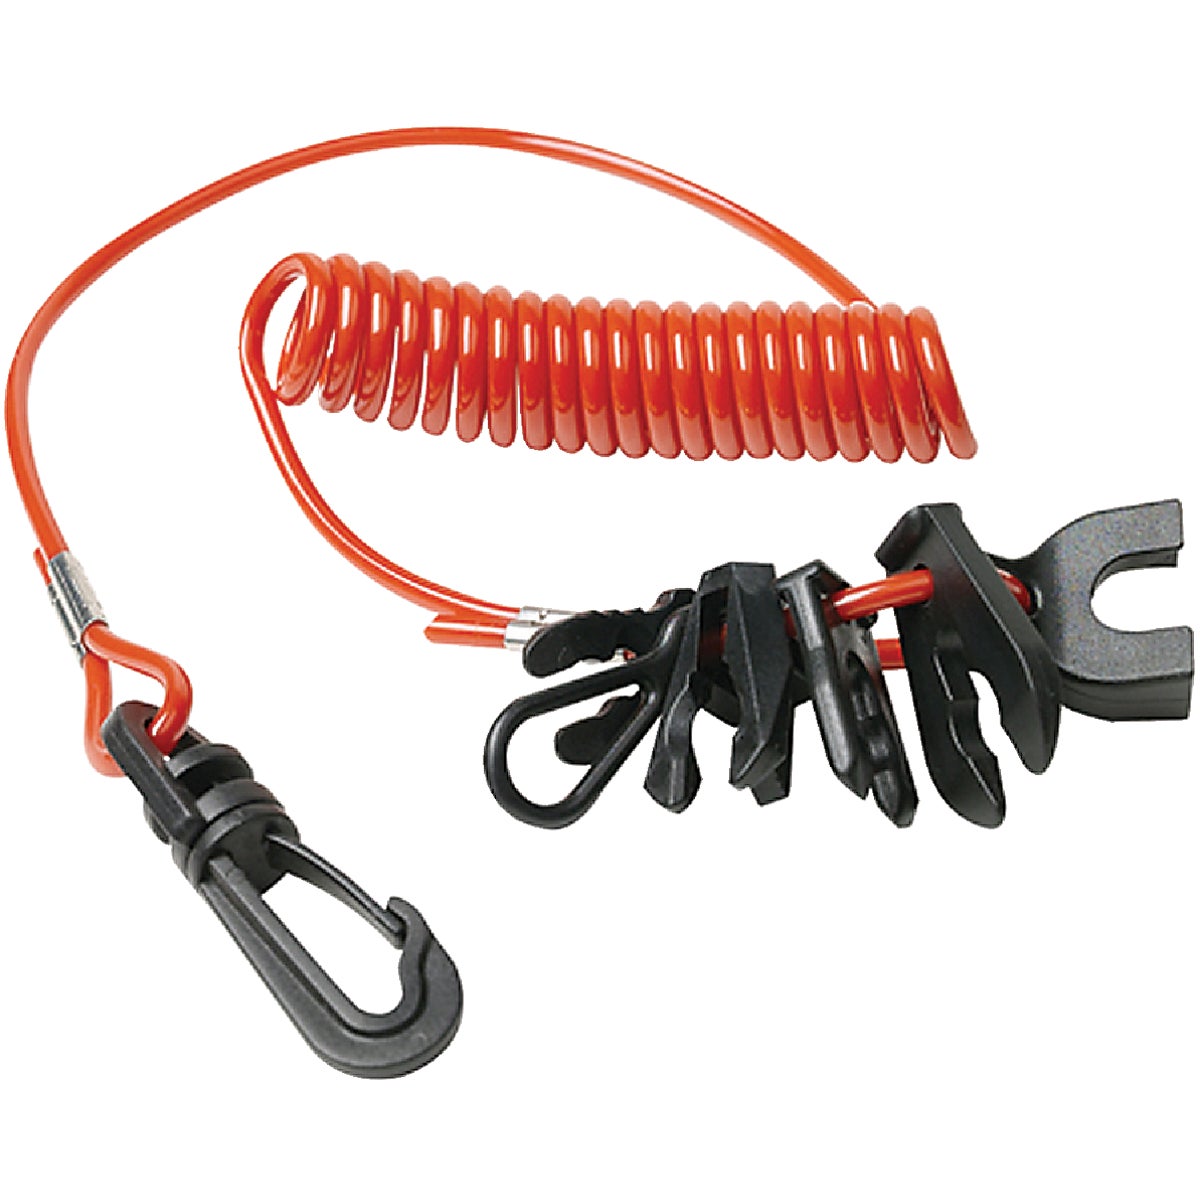 Item 570390, Coil lanyard with 7 keys.